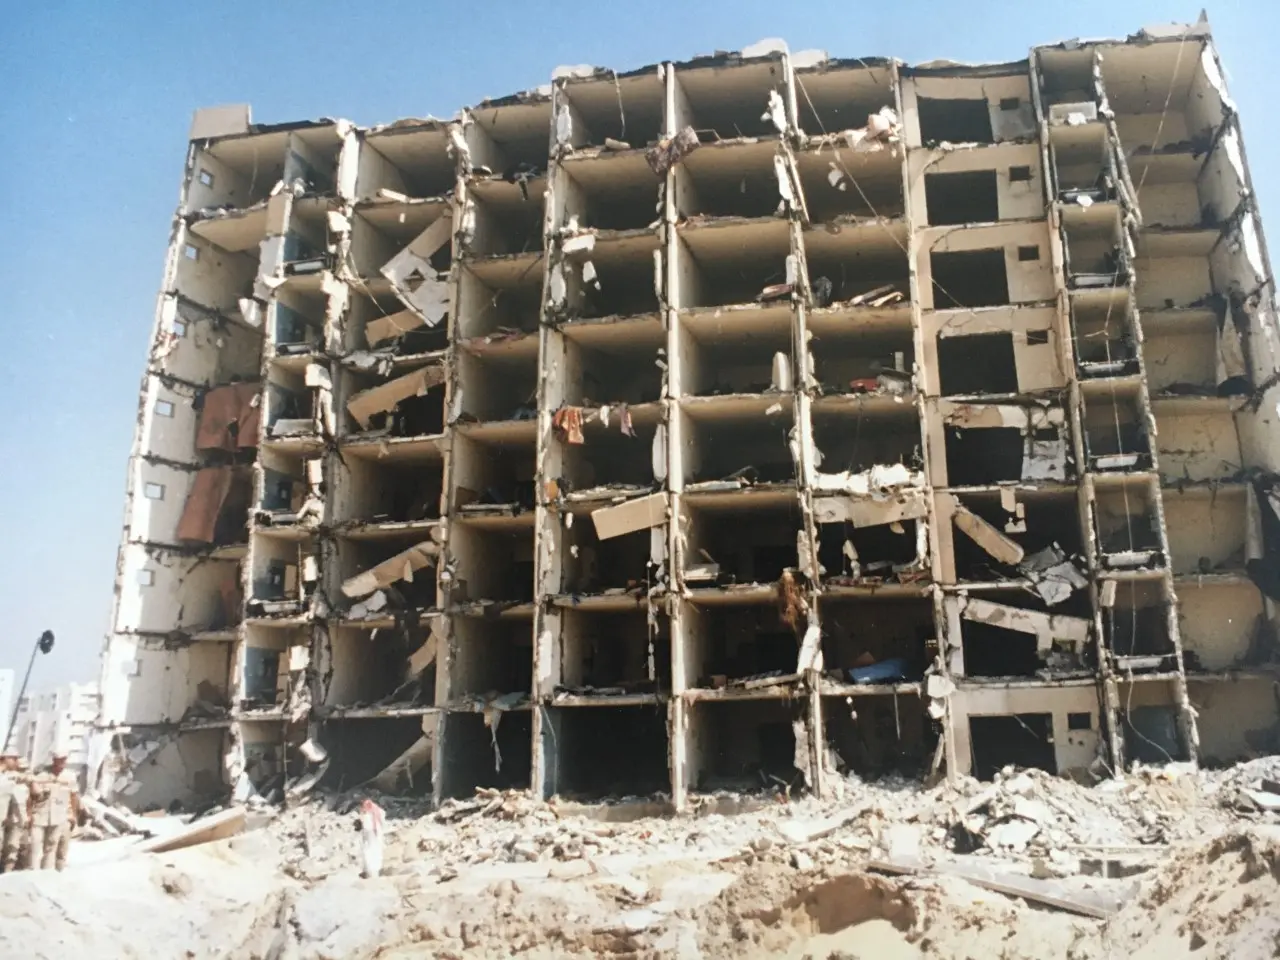 Bomb scene at Khobar towers. At about 9:30 pm in the evening of June 25, 1996, a huge explosion rocked the barracks for the United States Air Force 4404 Provisional Wing in Khobar, Saudi Arabia.